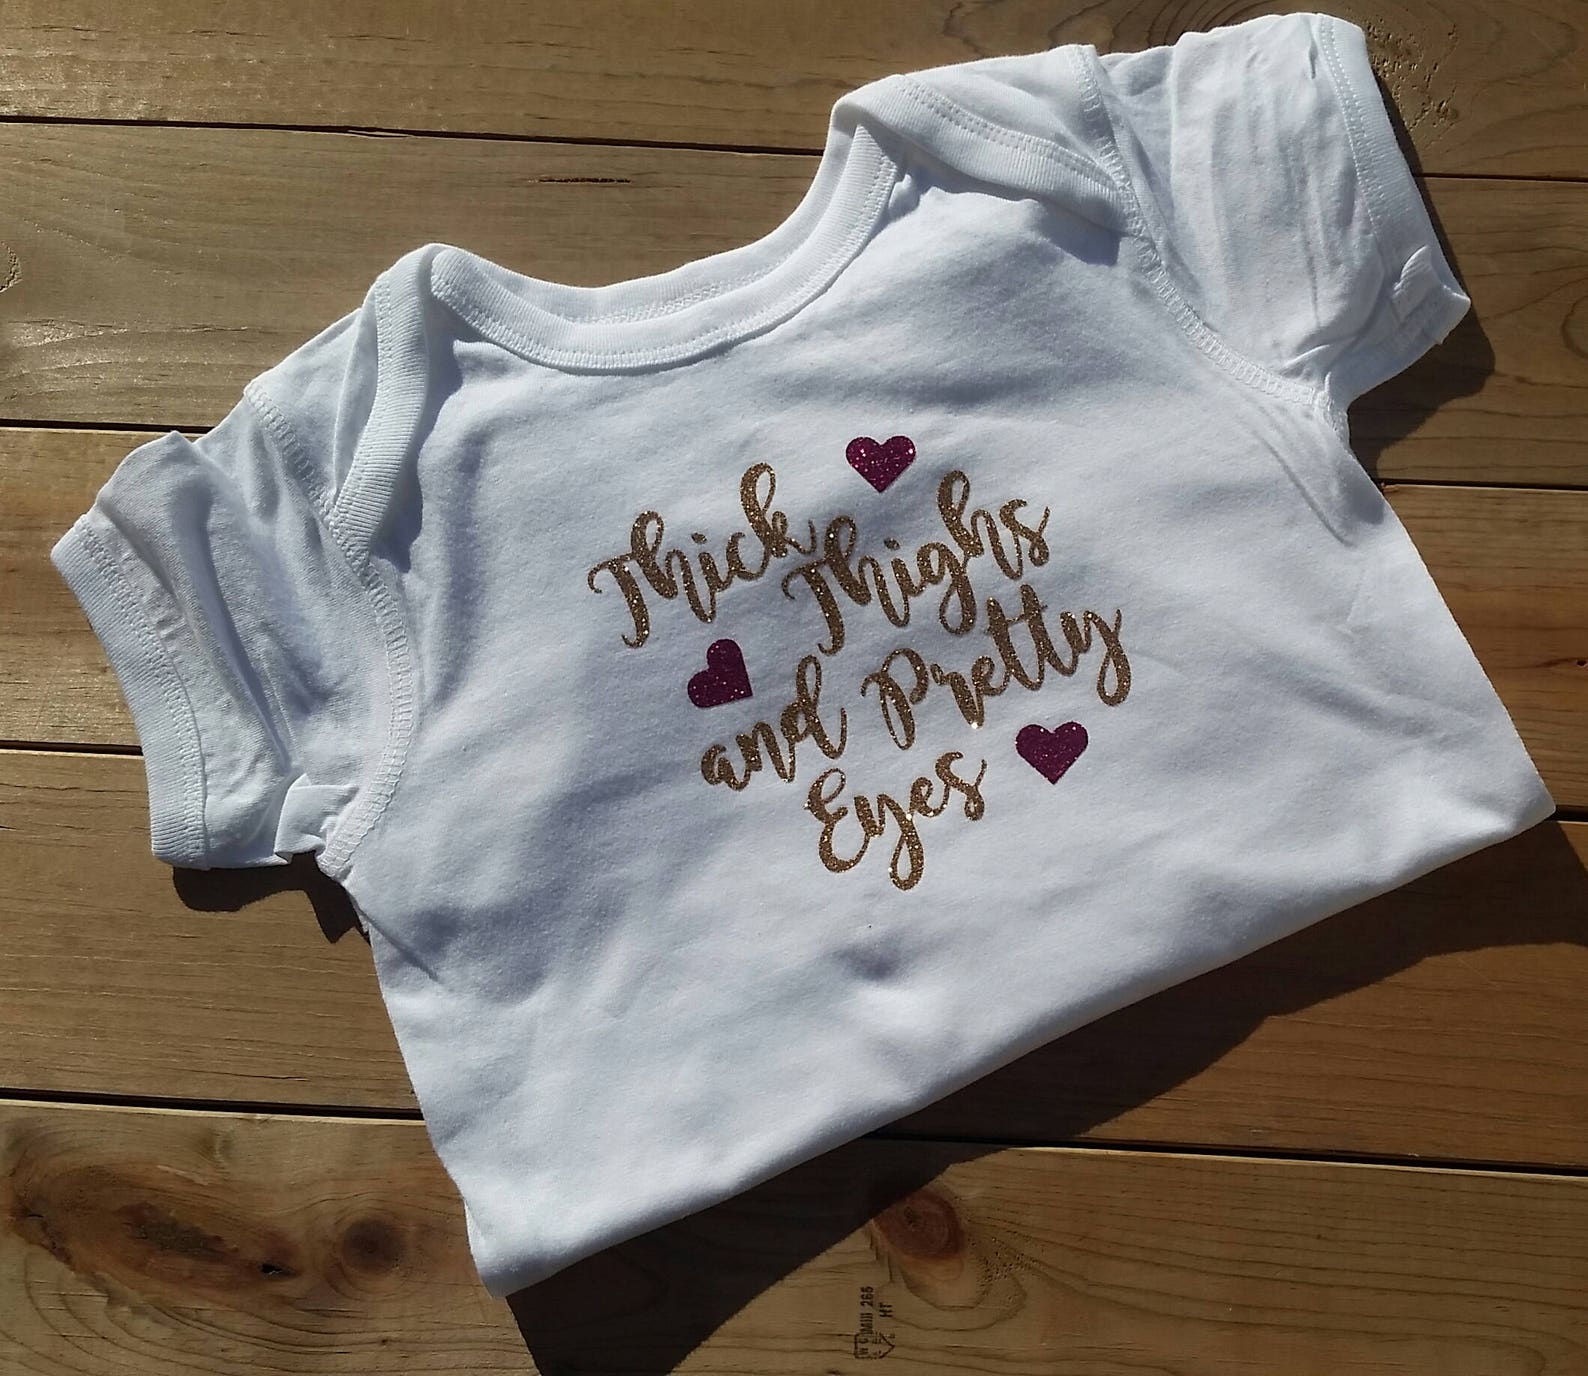 Thick Thighs and Pretty Eyes Baby-toddler Shirt Design - Etsy